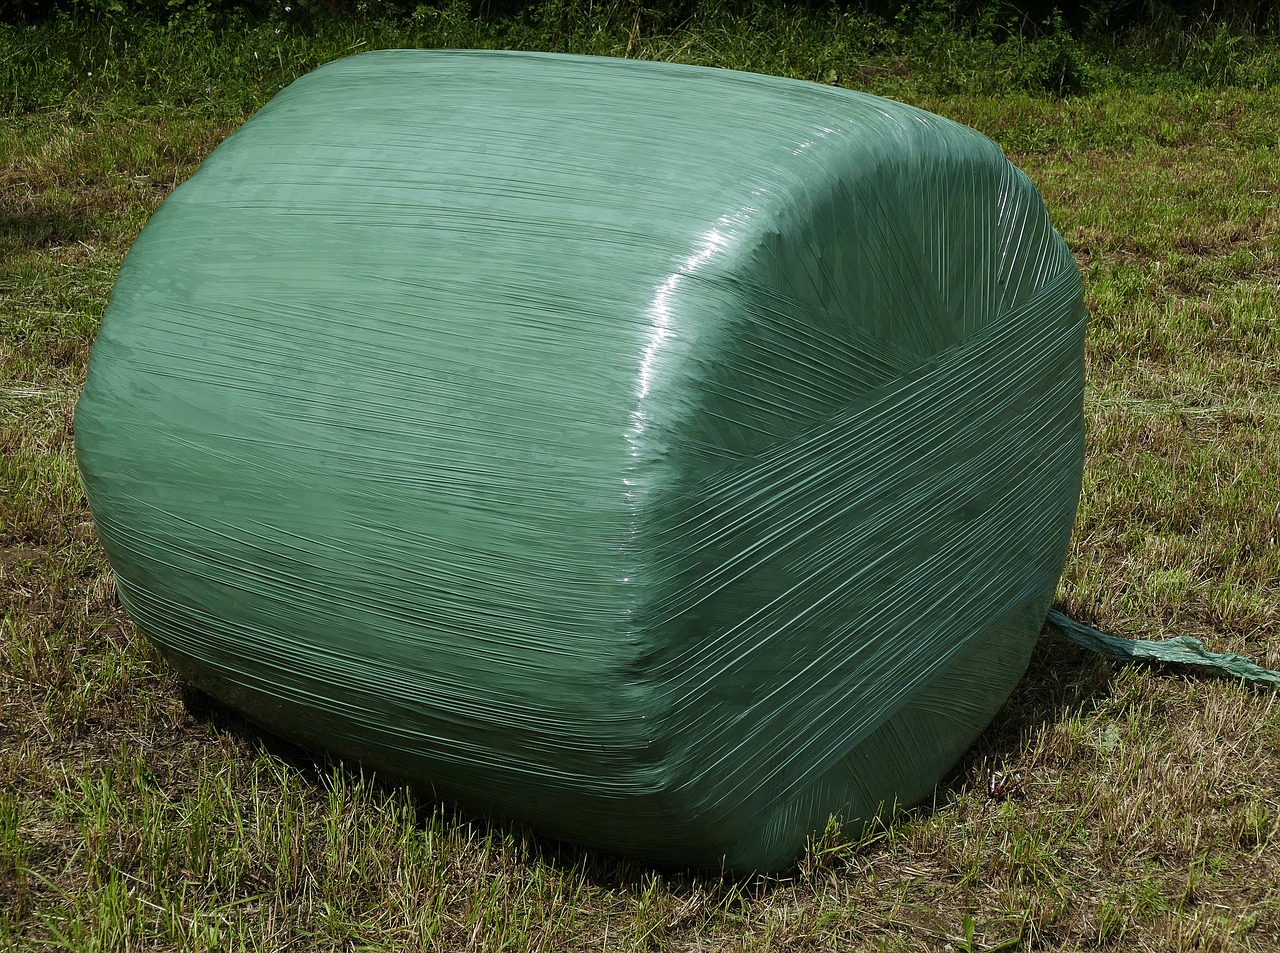 bale silage bales silage free photo